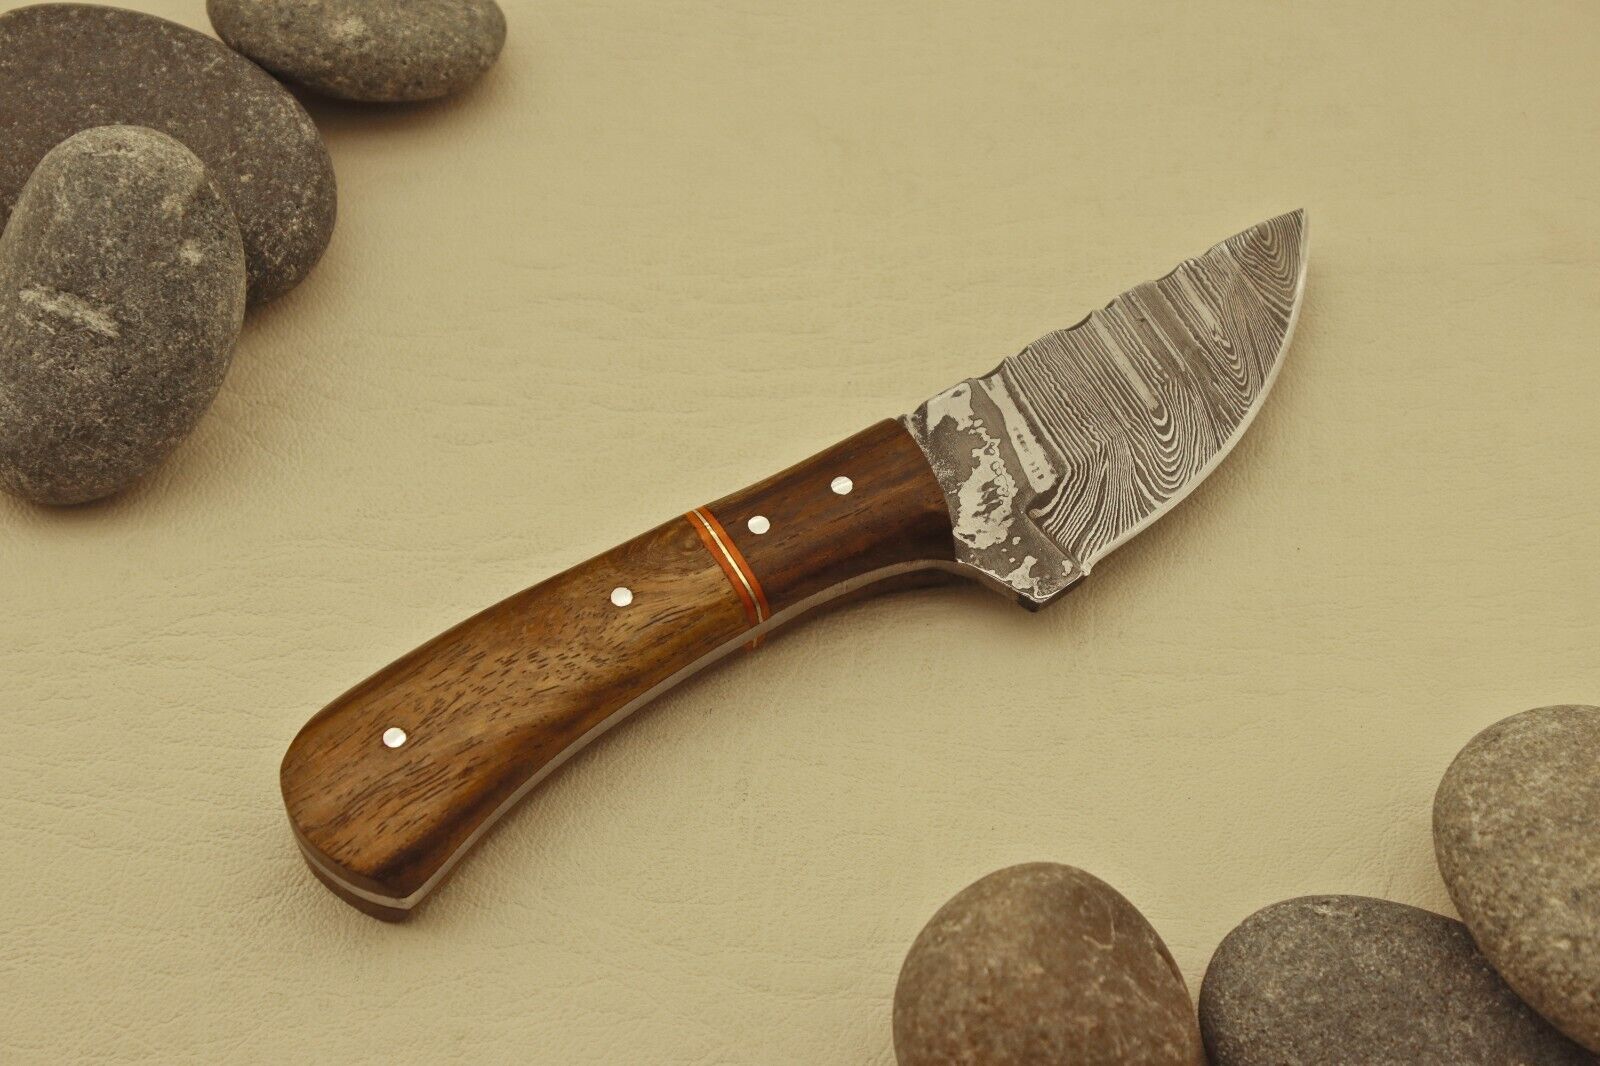 Collectible Handmade Damascus Blade RoseWood Handle Fixed Blade Hunting Knife